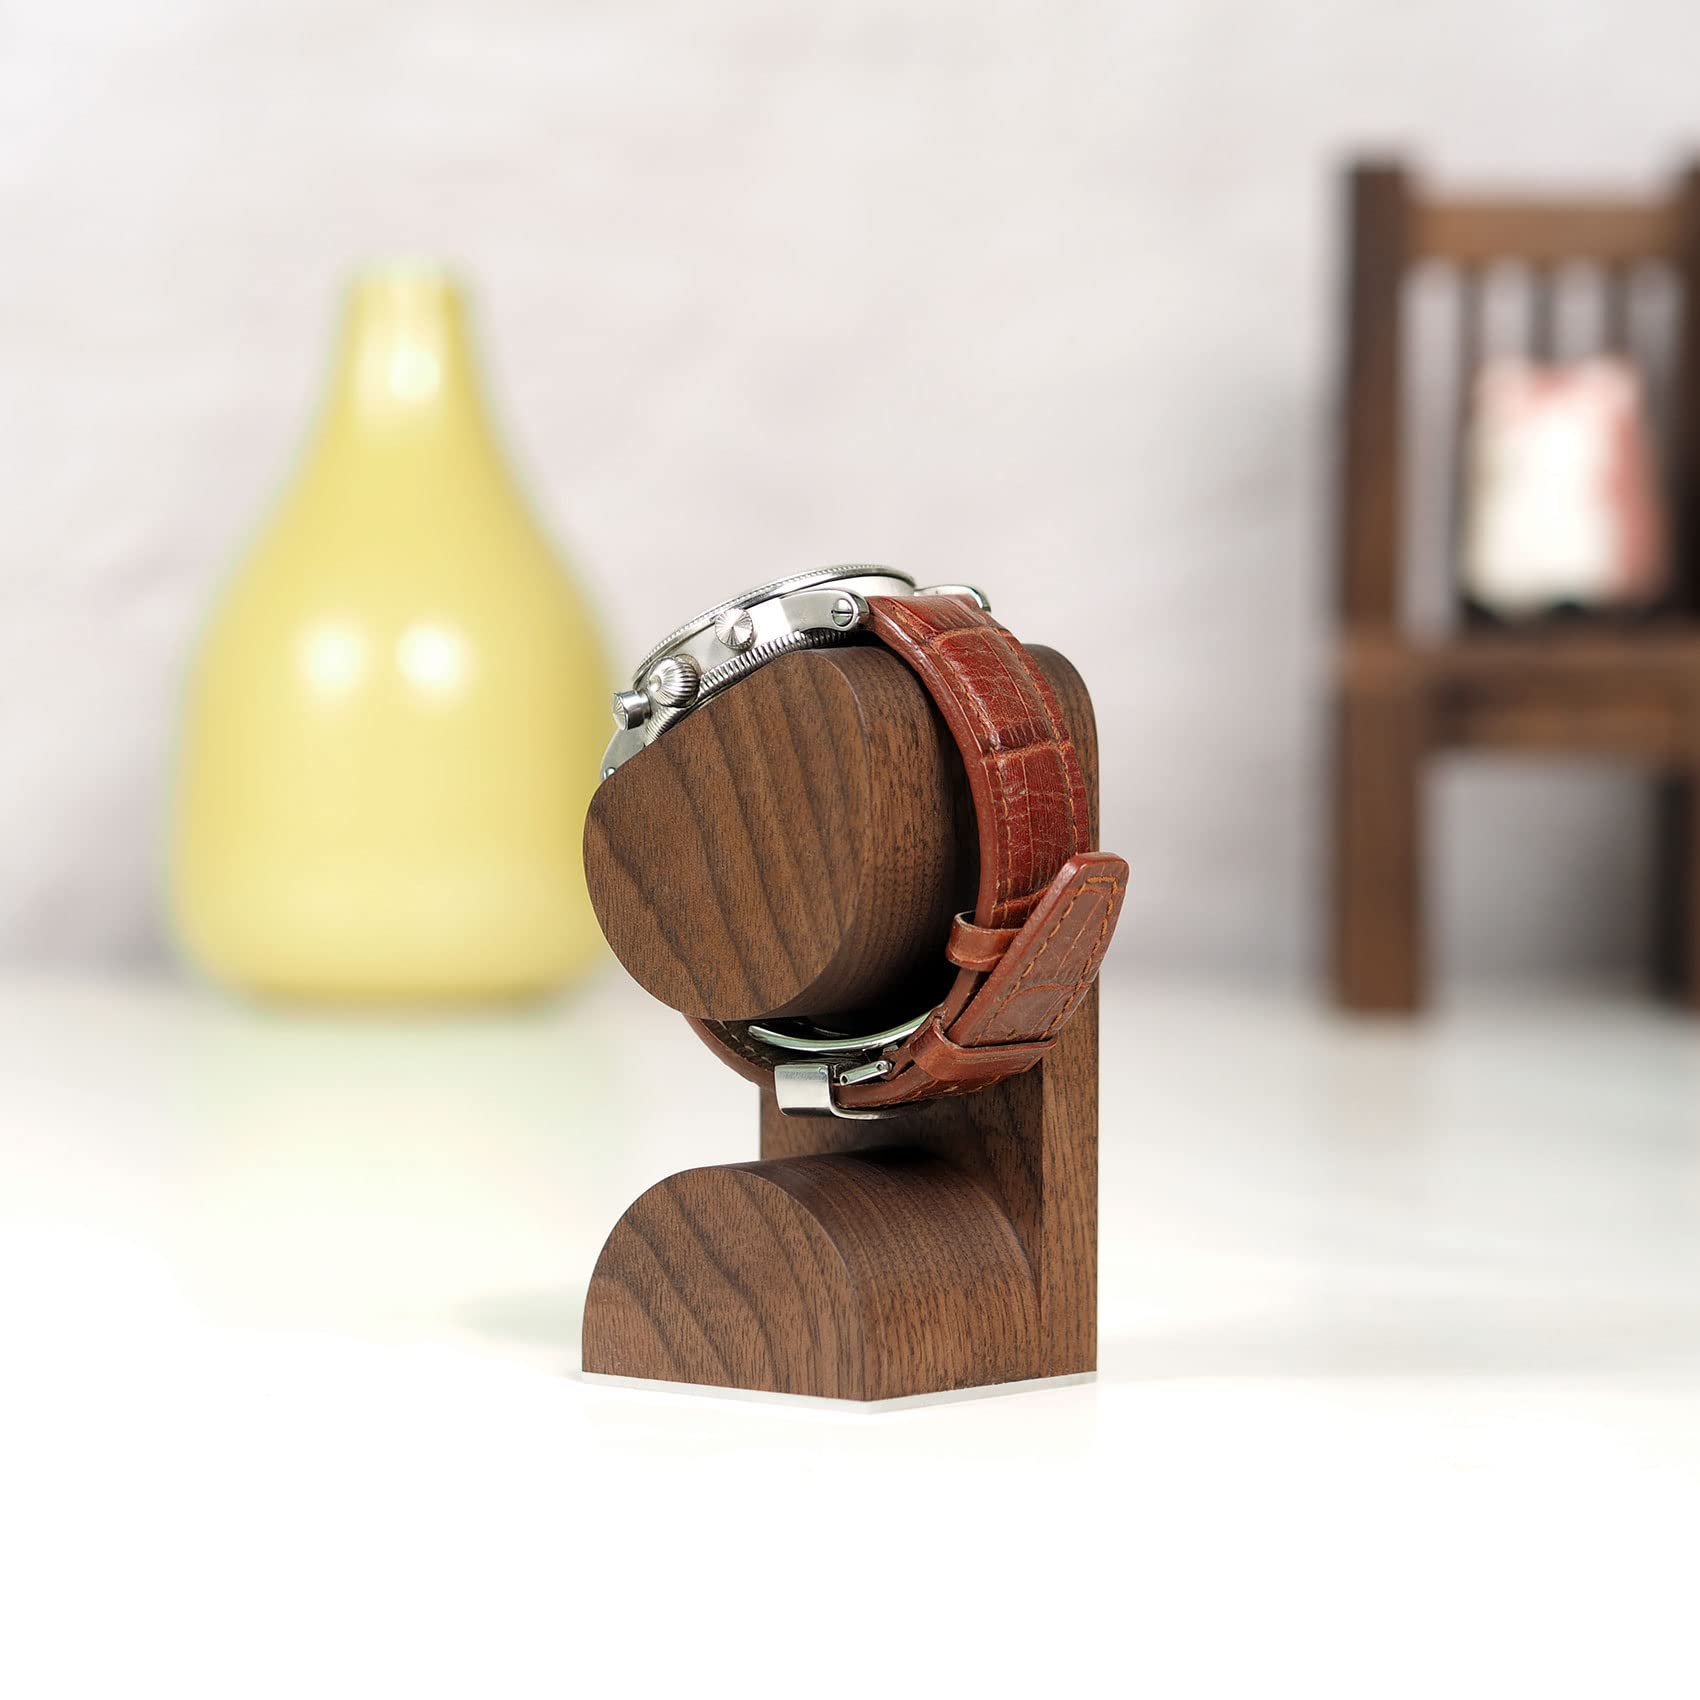 Watch Stand Handcrafted solid wood Watch Display Stand for both Men's and Women's Wrist Watches